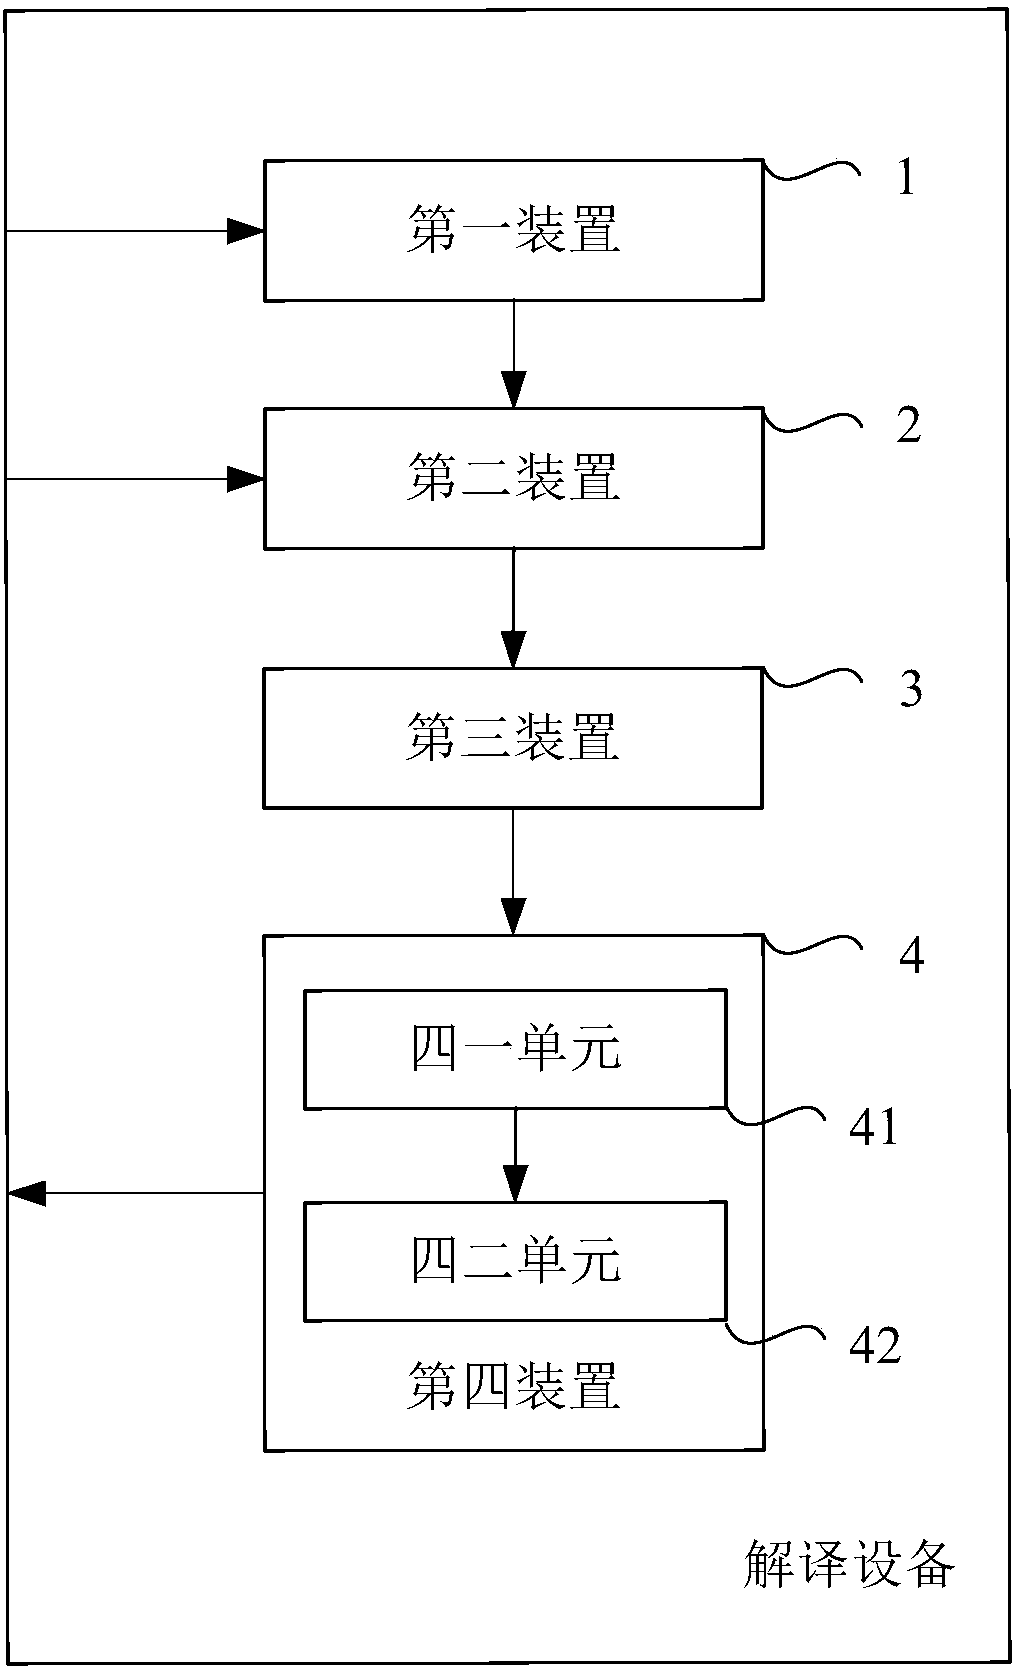 Method and device for automatic interpretation of remote sensing images